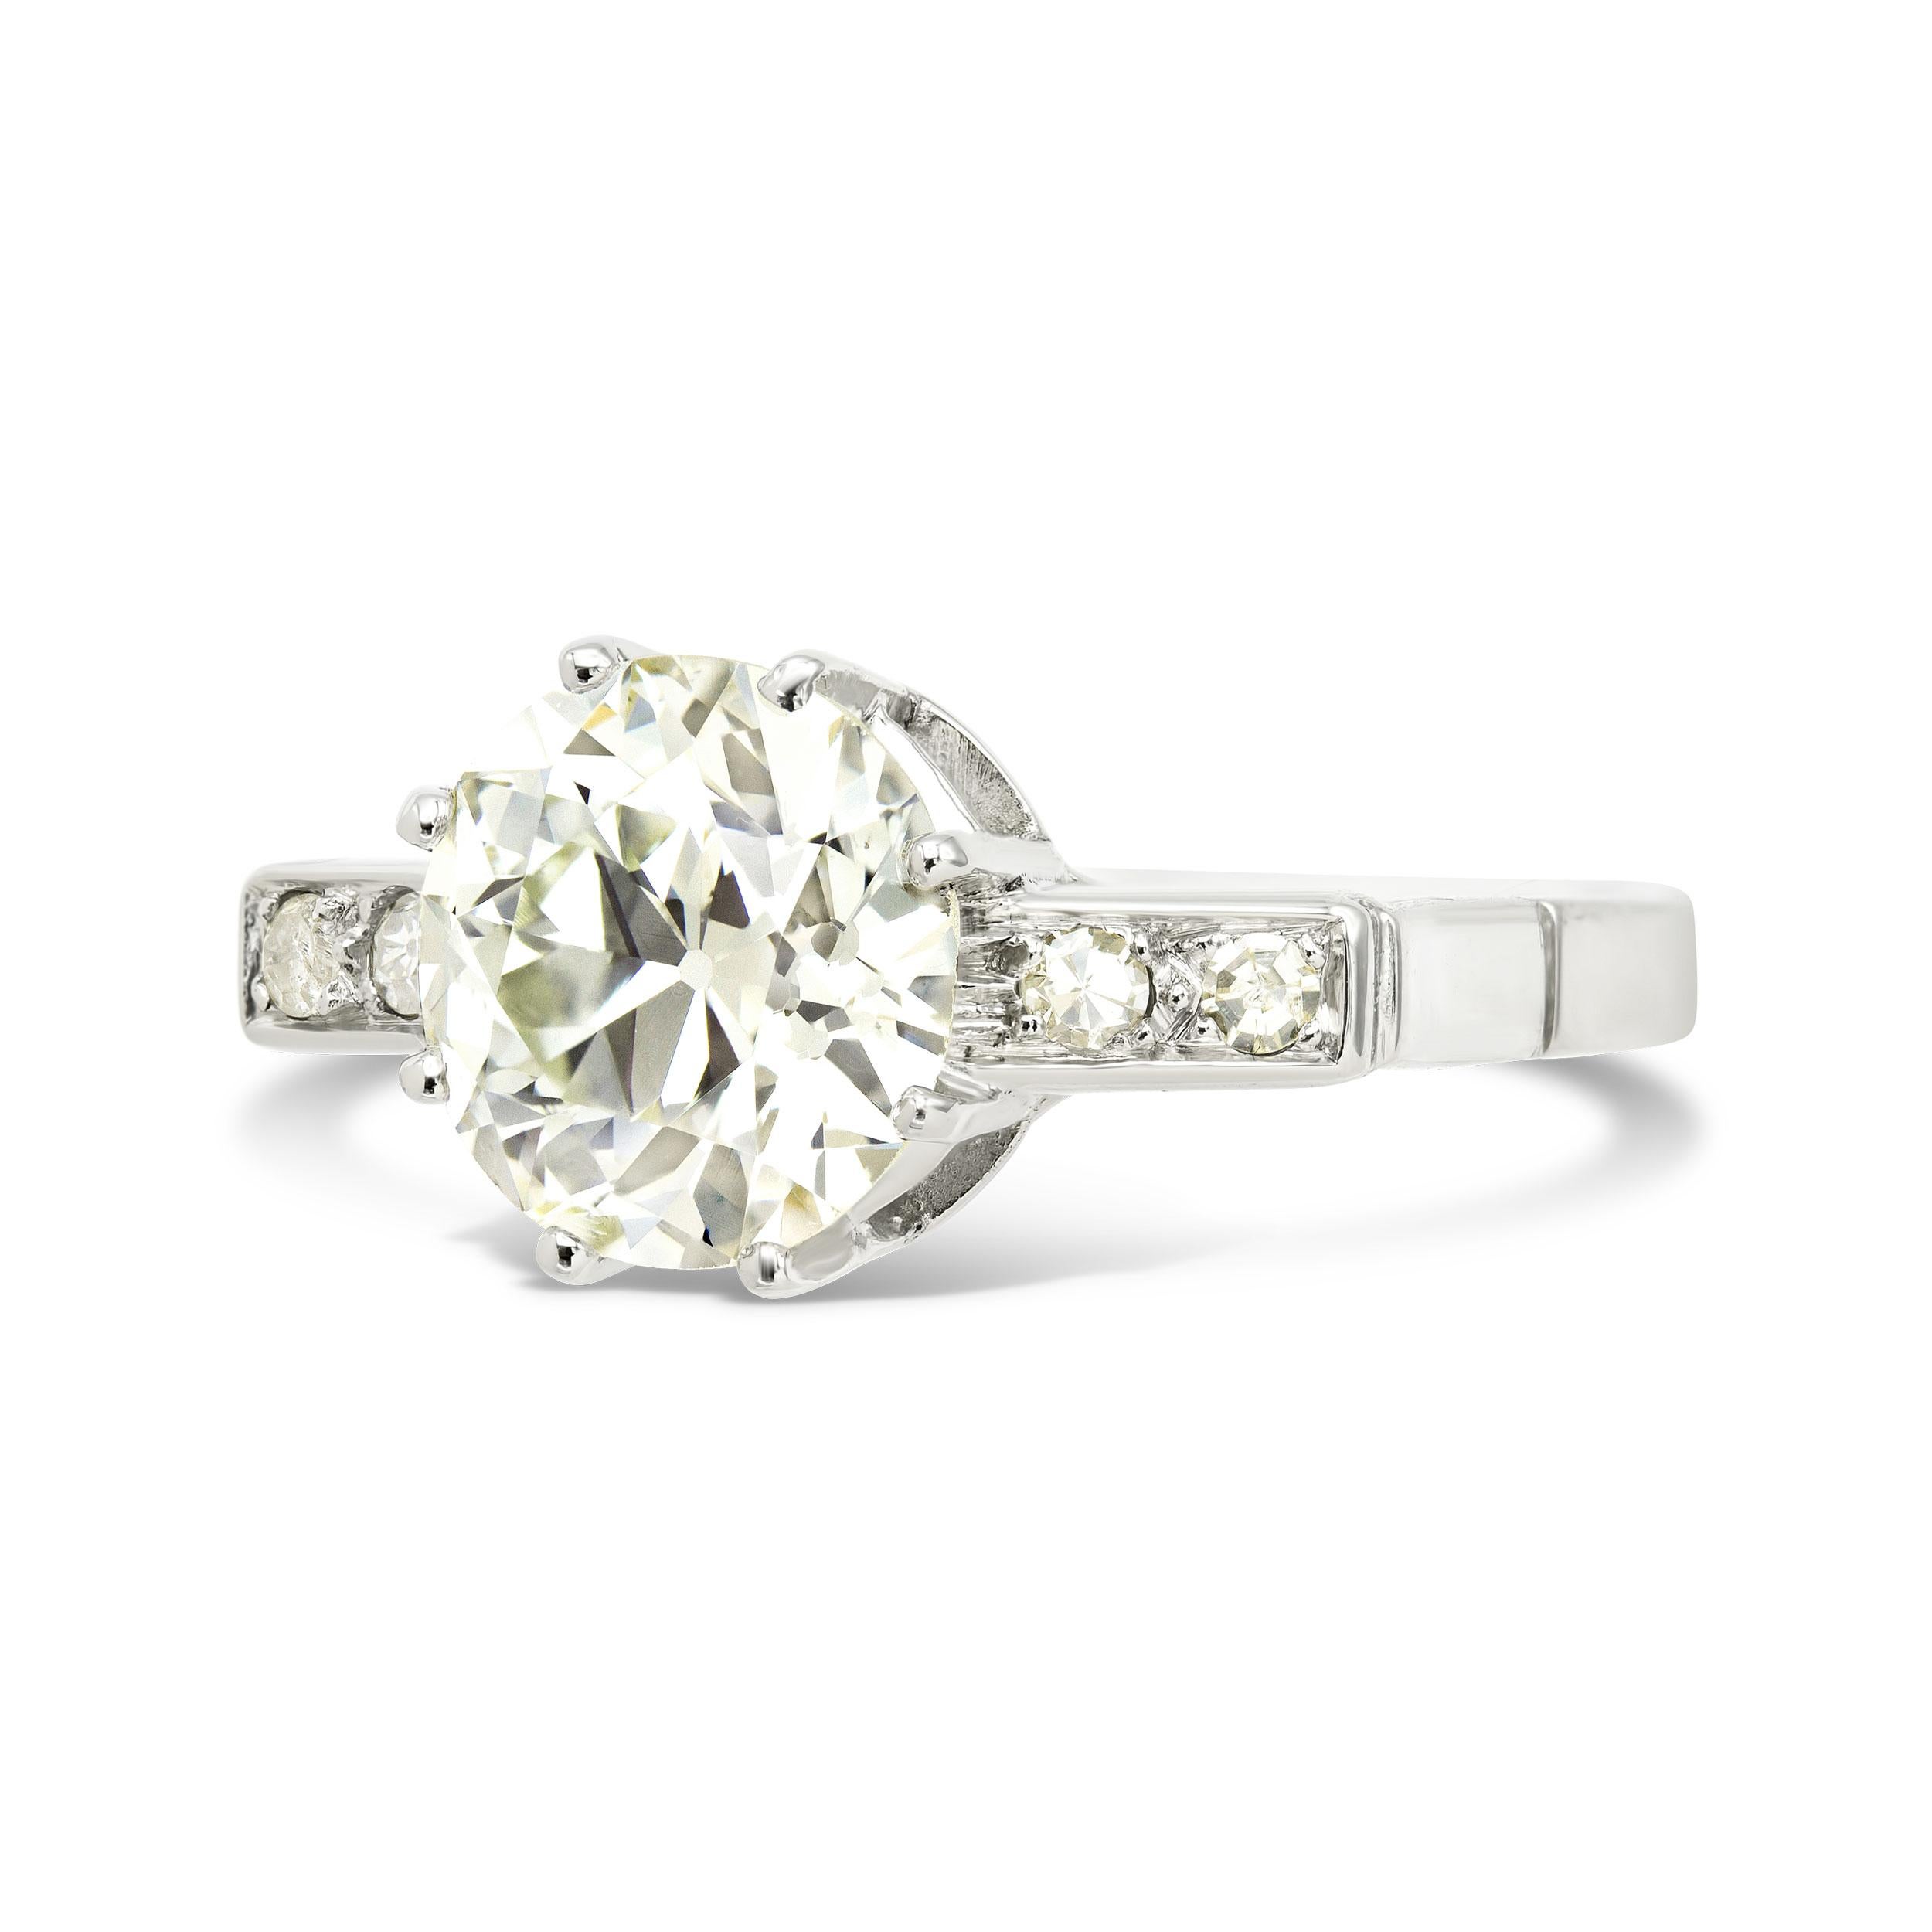 An antique old European cut diamond set in a classic Art Deco era setting, this engagement ring is the real deal. Our center is a GIA certified 2.69 ct. diamond with all the charm of an old Euro - with a large culet and blocky facets it throws light